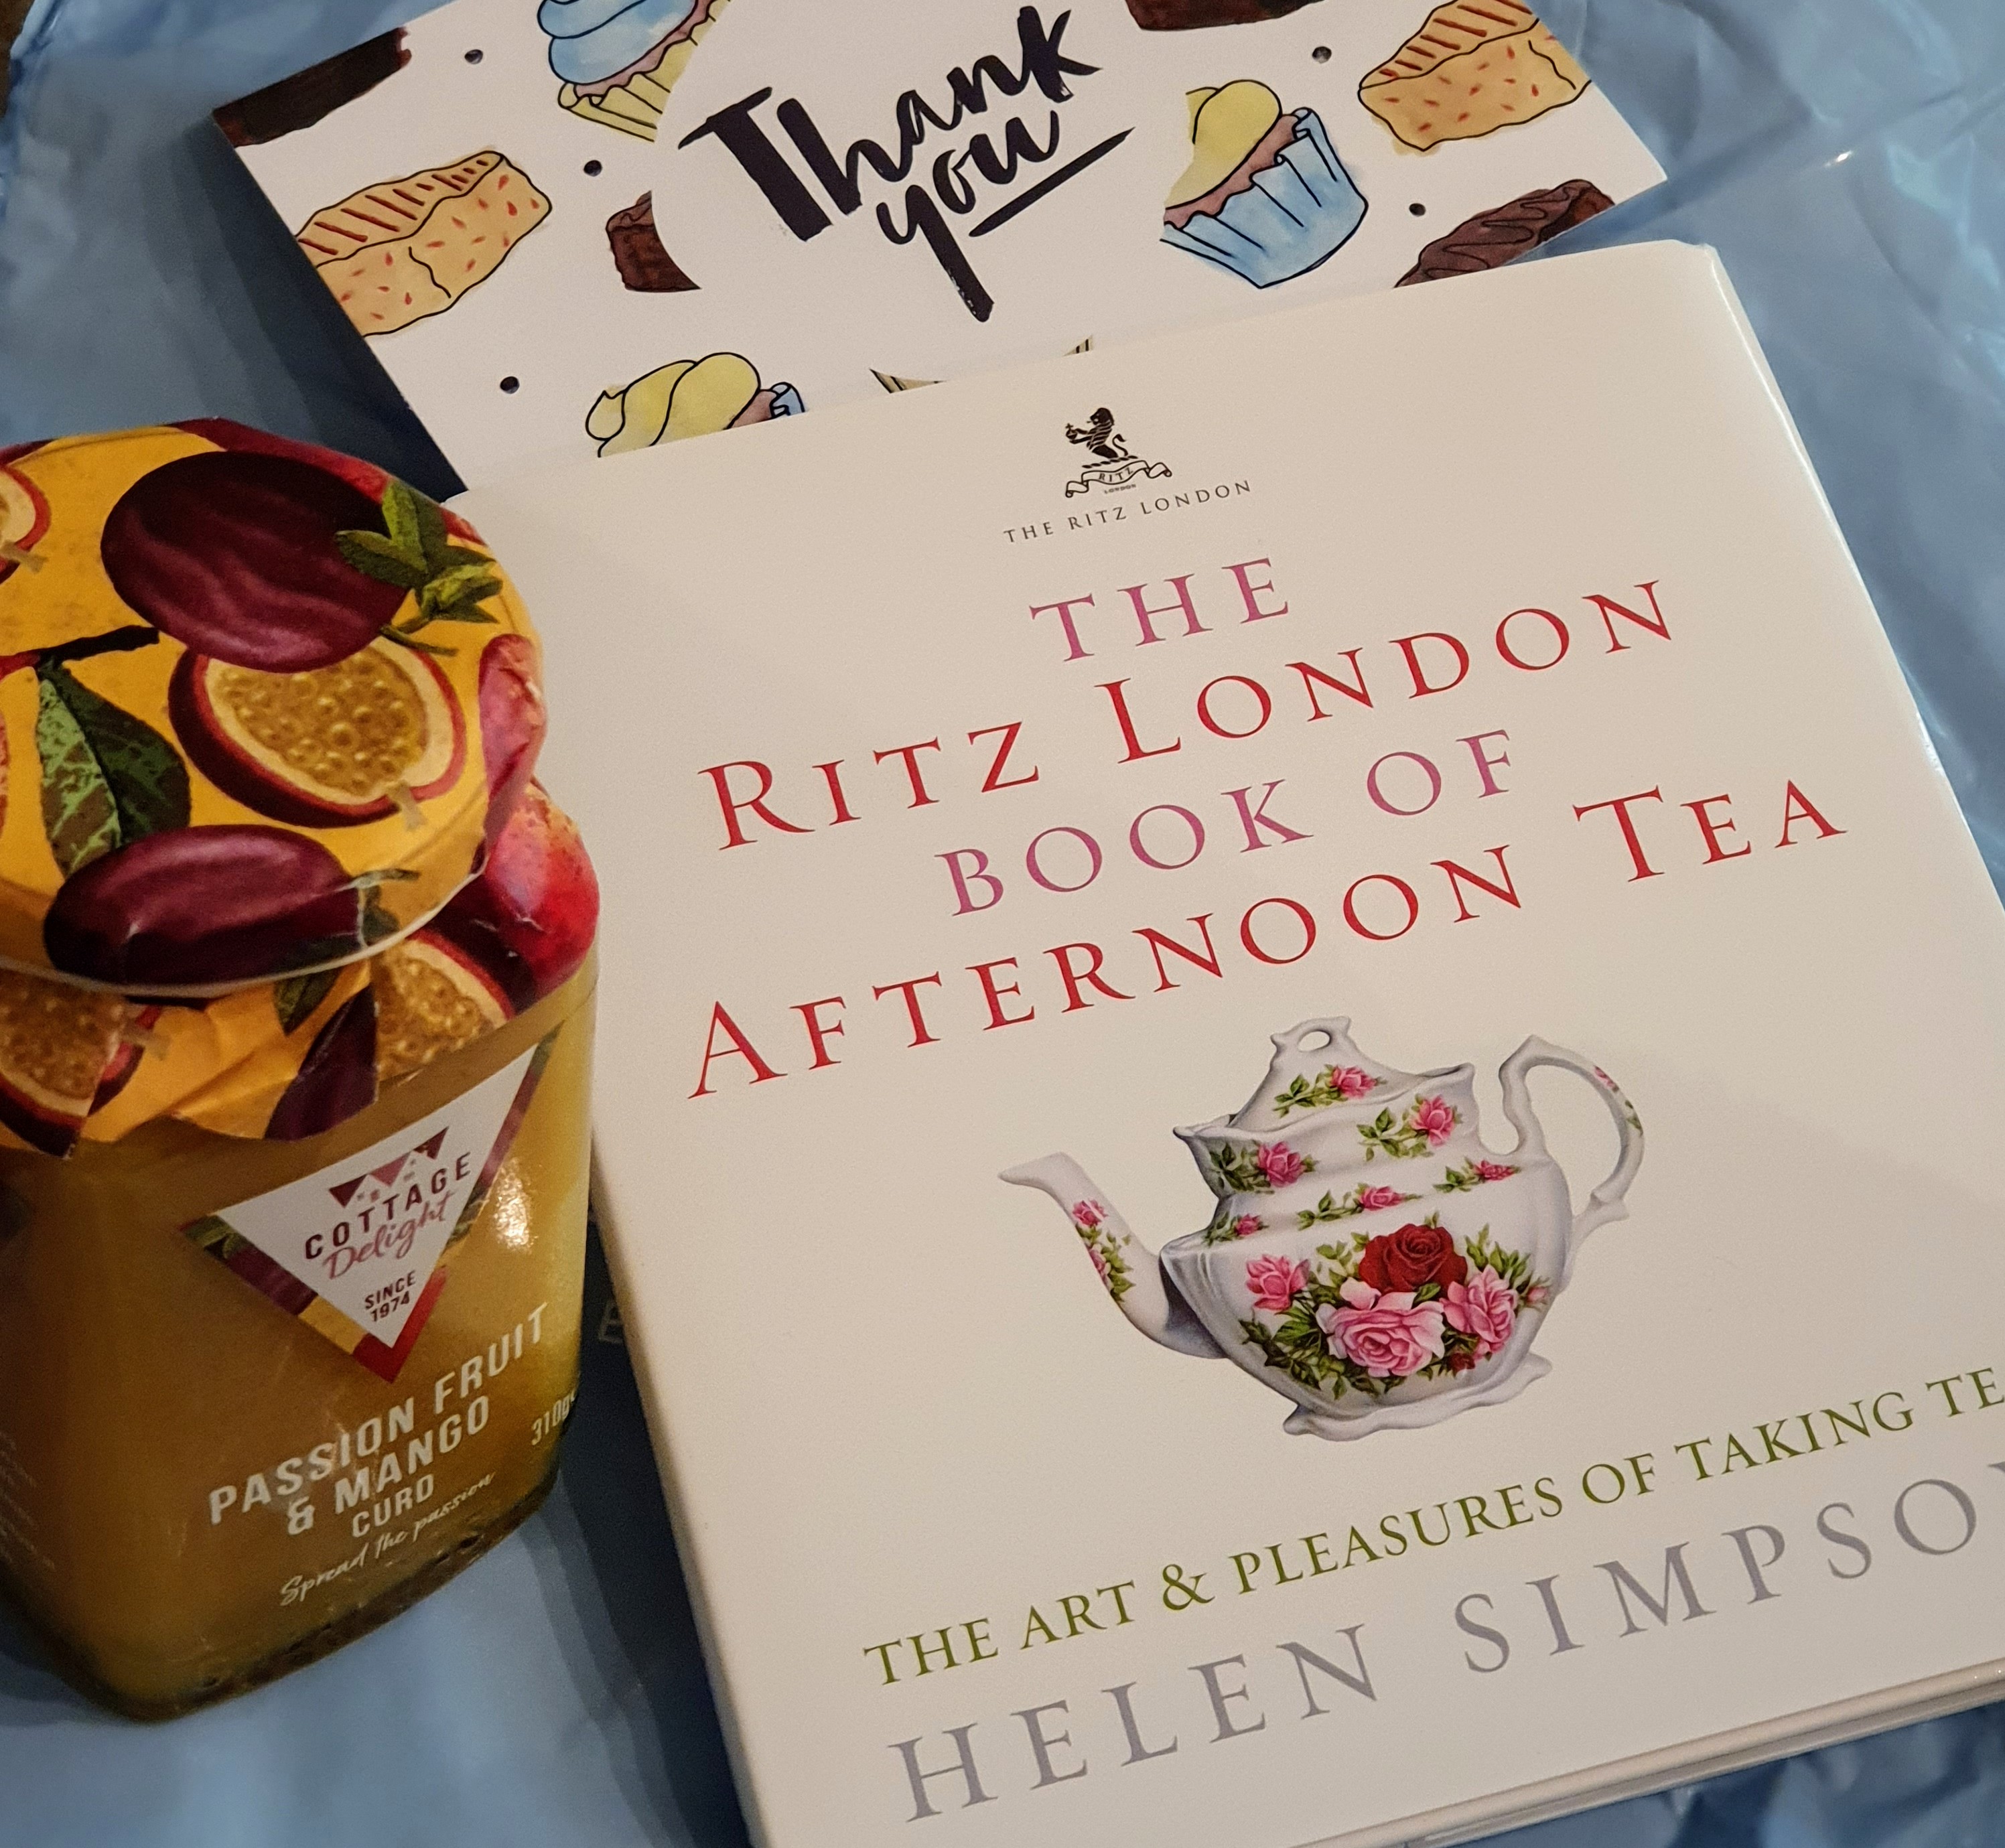 Passion fruit curd and afternoon tea book